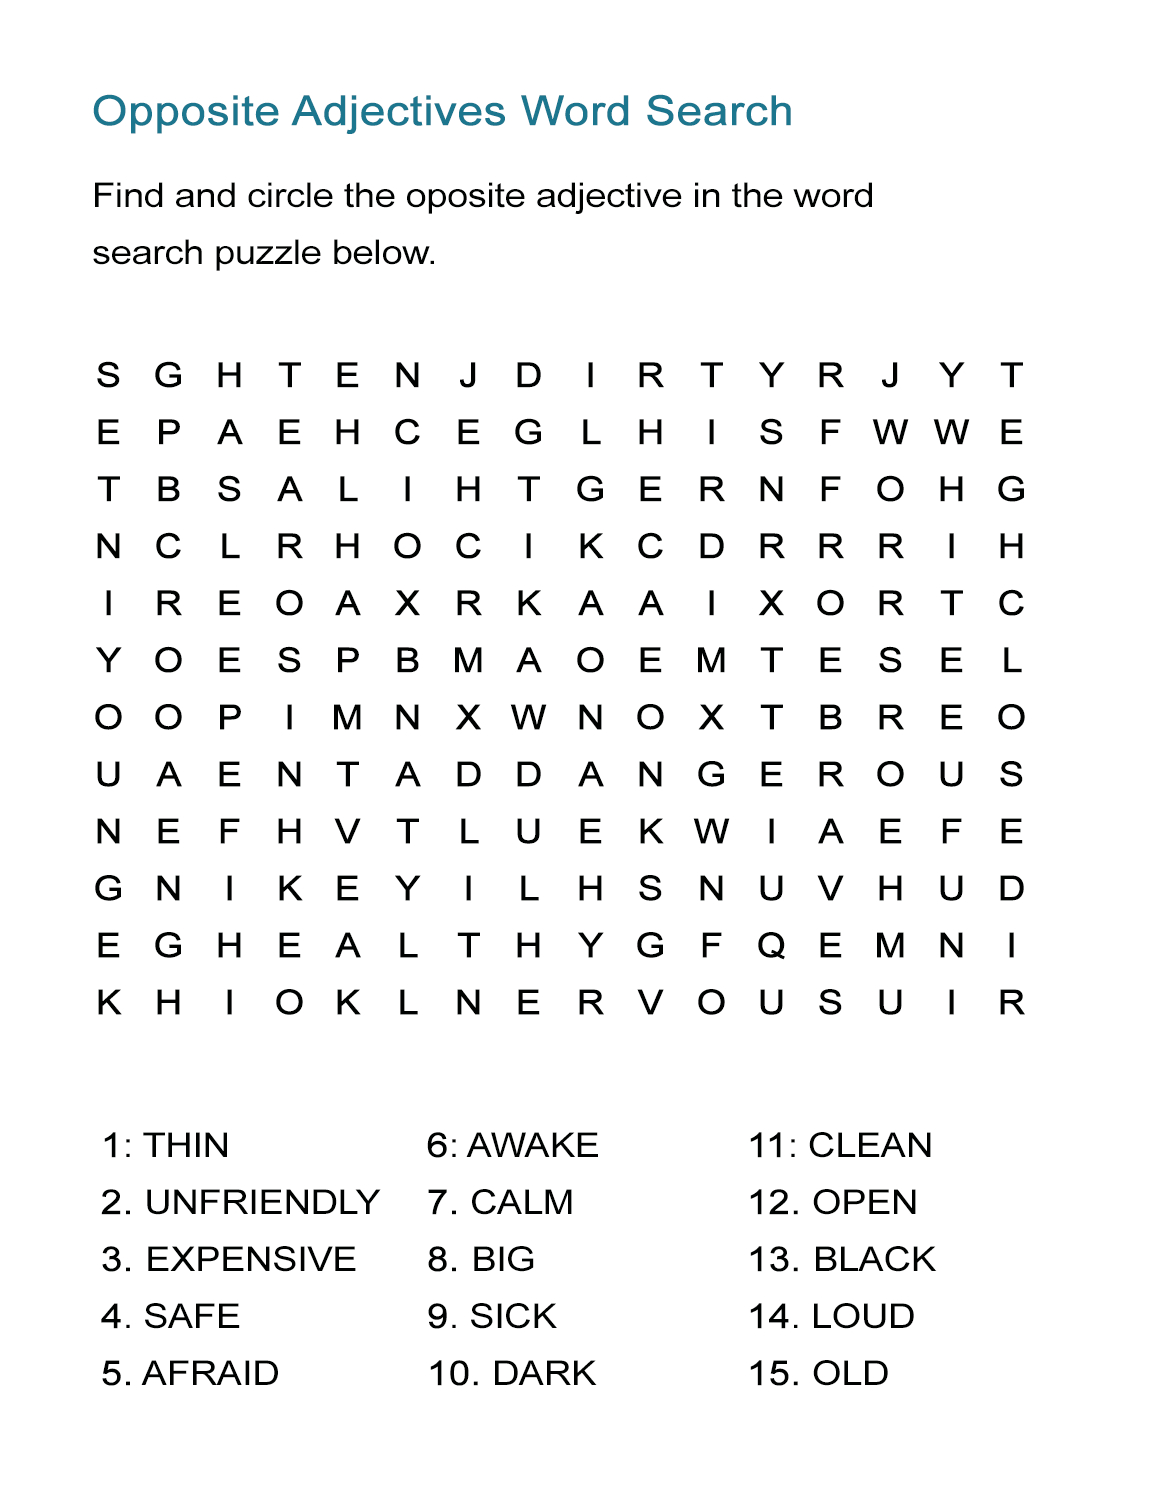 Opposite Adjectives Word Search Puzzle - All Esl - Printable Crossword Word Search Puzzles